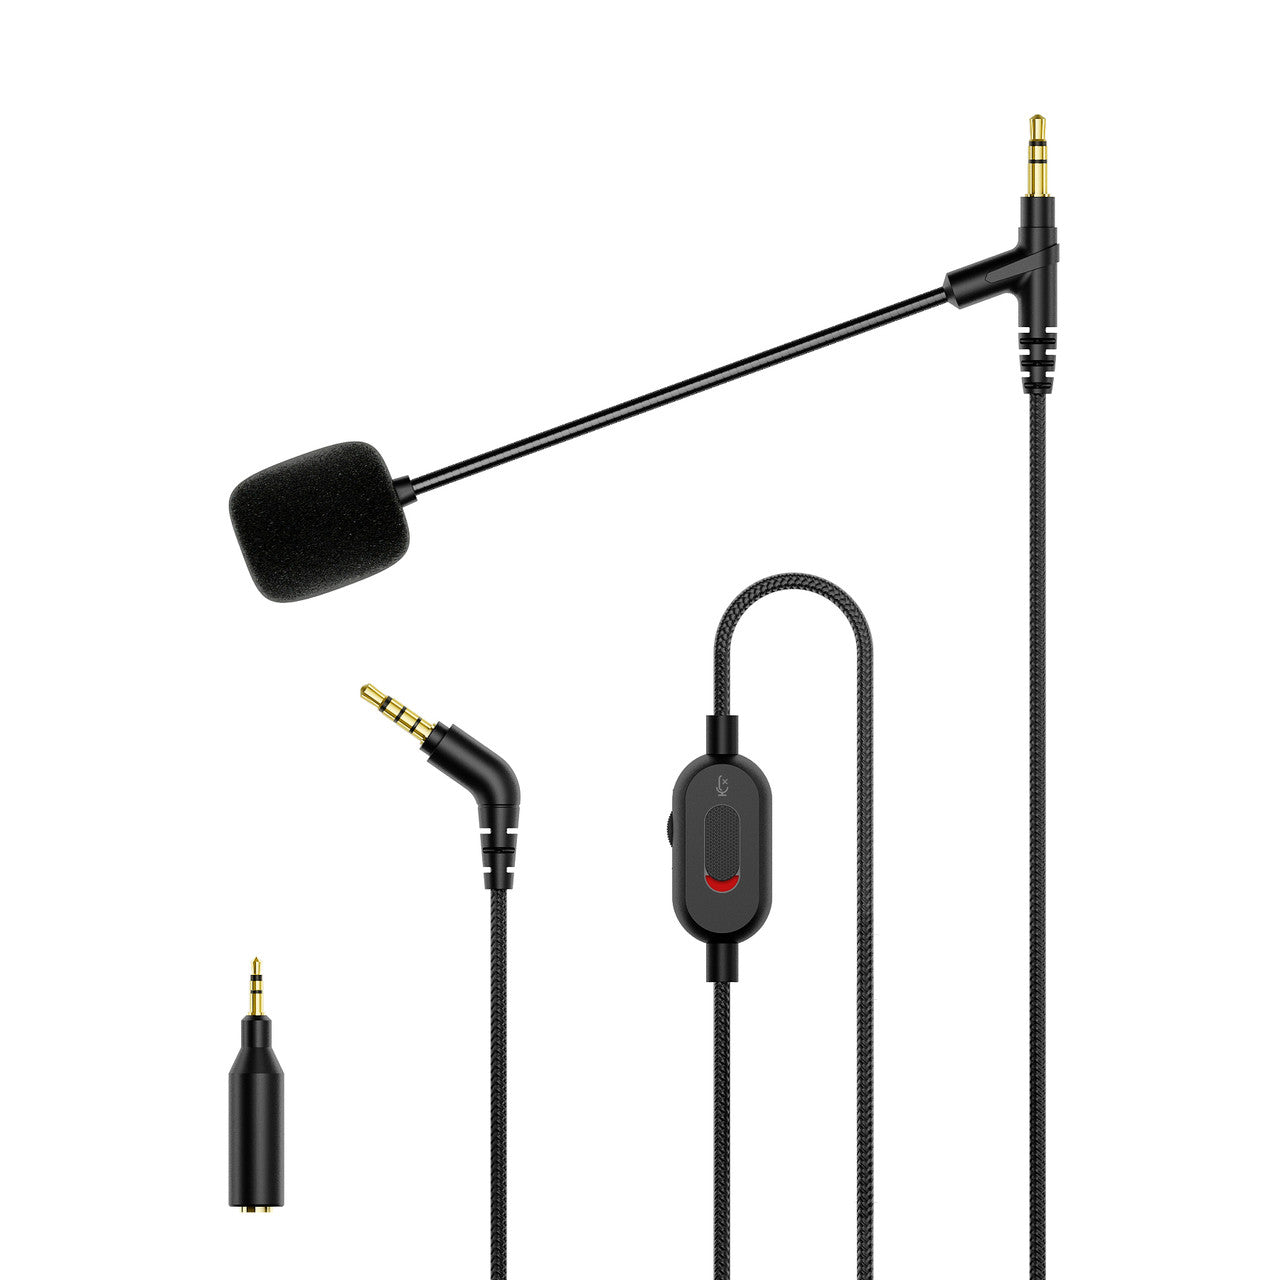 Image of ClearSpeak Universal 3.5 mm Audio Cable with Boom Mic.